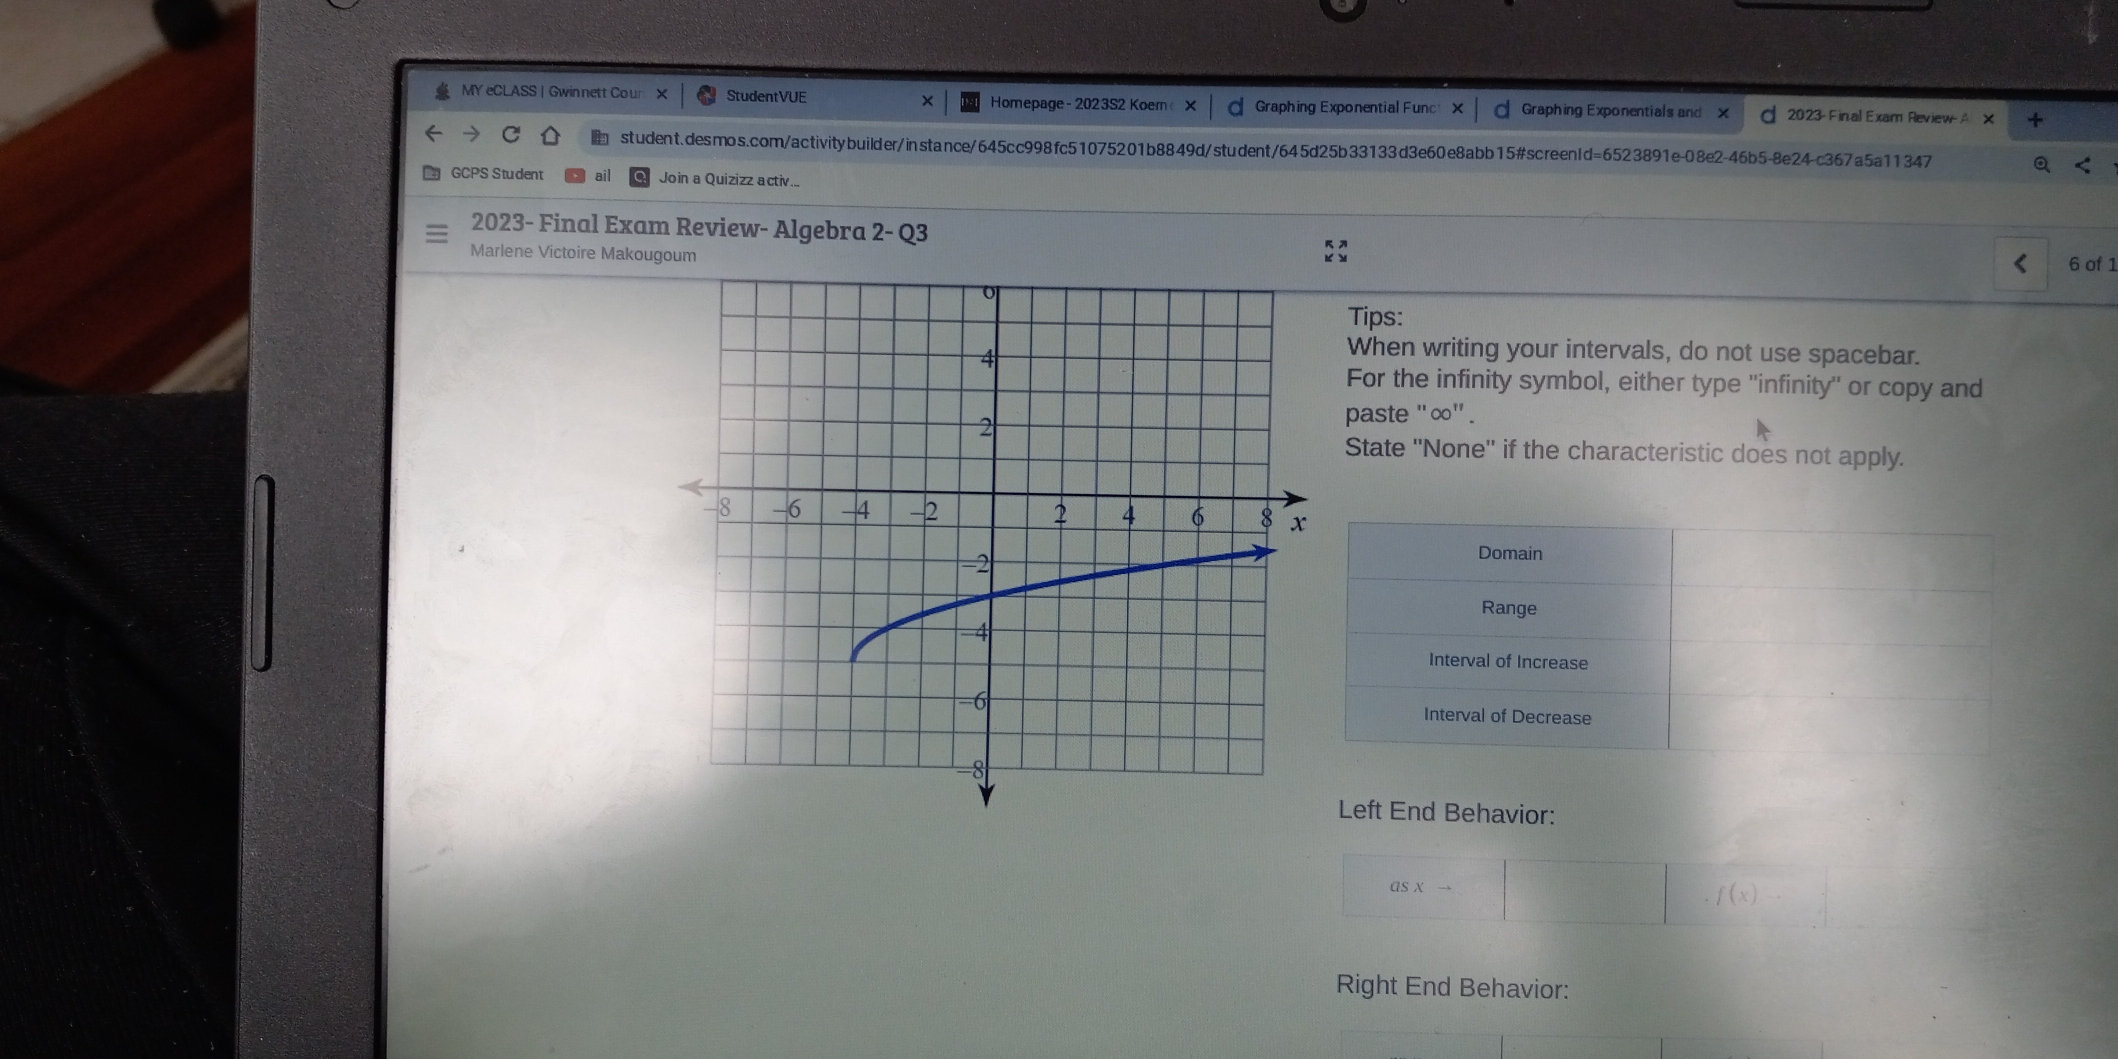 MY eCLASS | Gwinnett Cour × StudentVUE Homepage - 2023S2 Koem X Graphing Exponential Funce X Graphing Exponentials and X d 2023- Final Exam Review- A X + student.desmos.com/activitybuilder/instance/645cc998fc51075201b8849d/student/645d25b33133d3e60e8abb15#screenId=6523891e-08e2-46b5-8e24-c367a5a11347 Q < GCPS Student ail Join a Quizizz activ... 2023- Final Exam Review- Algebra 2- Q3 Marlene Victoire Makougoum < 6 of 1 Tips: When writing your intervals, do not use spacebar. For the infinity symbol, either type ''infinity'' or copy and paste "∞" . State ''None'' if the characteristic does not apply. Domain Range Interval of Increase Interval of Decrease Left End Behavior: asxto x_1+x_2=frac square square ,fx Right End Behavior: